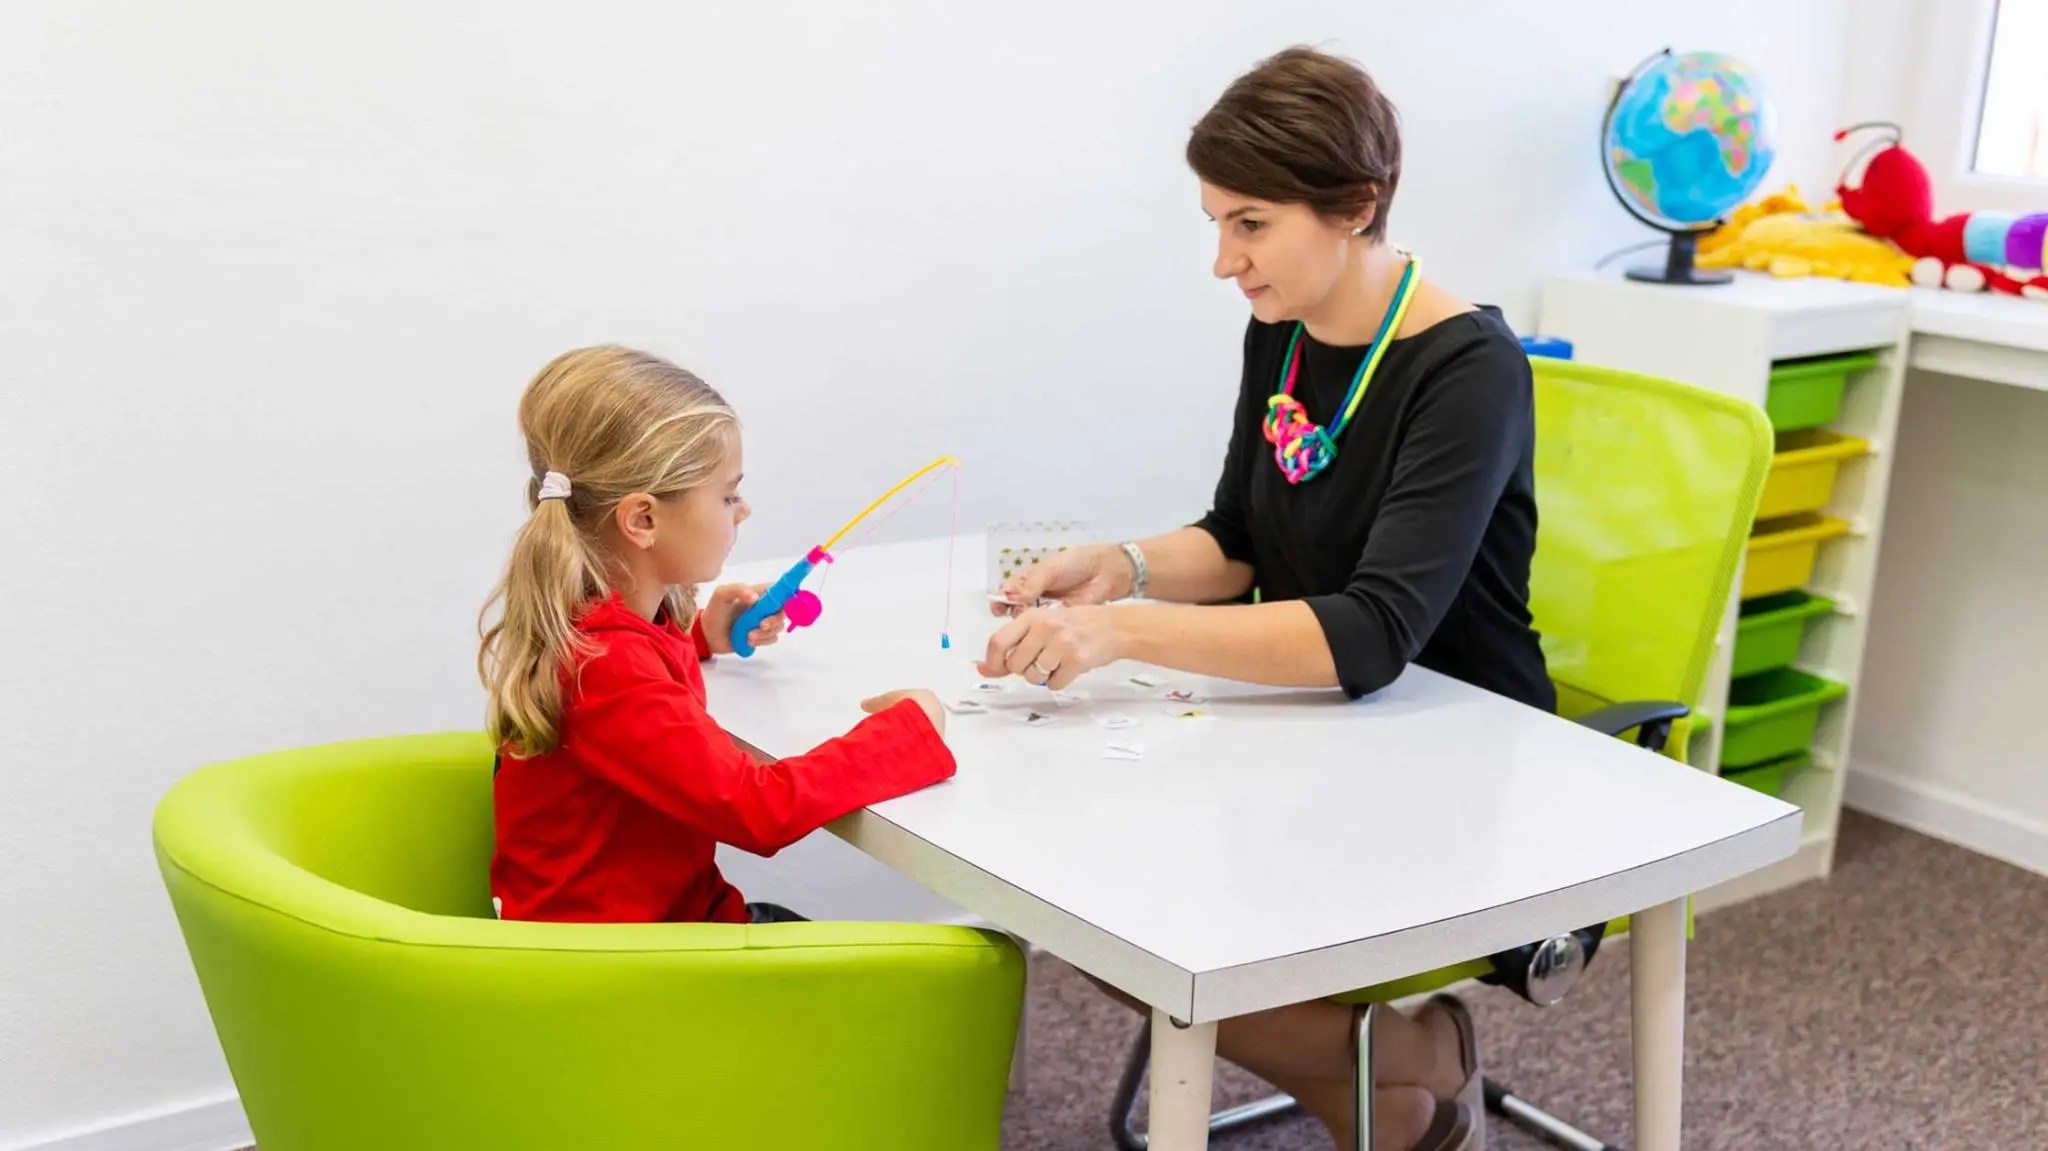 Child and woman performing learning exercise at table.